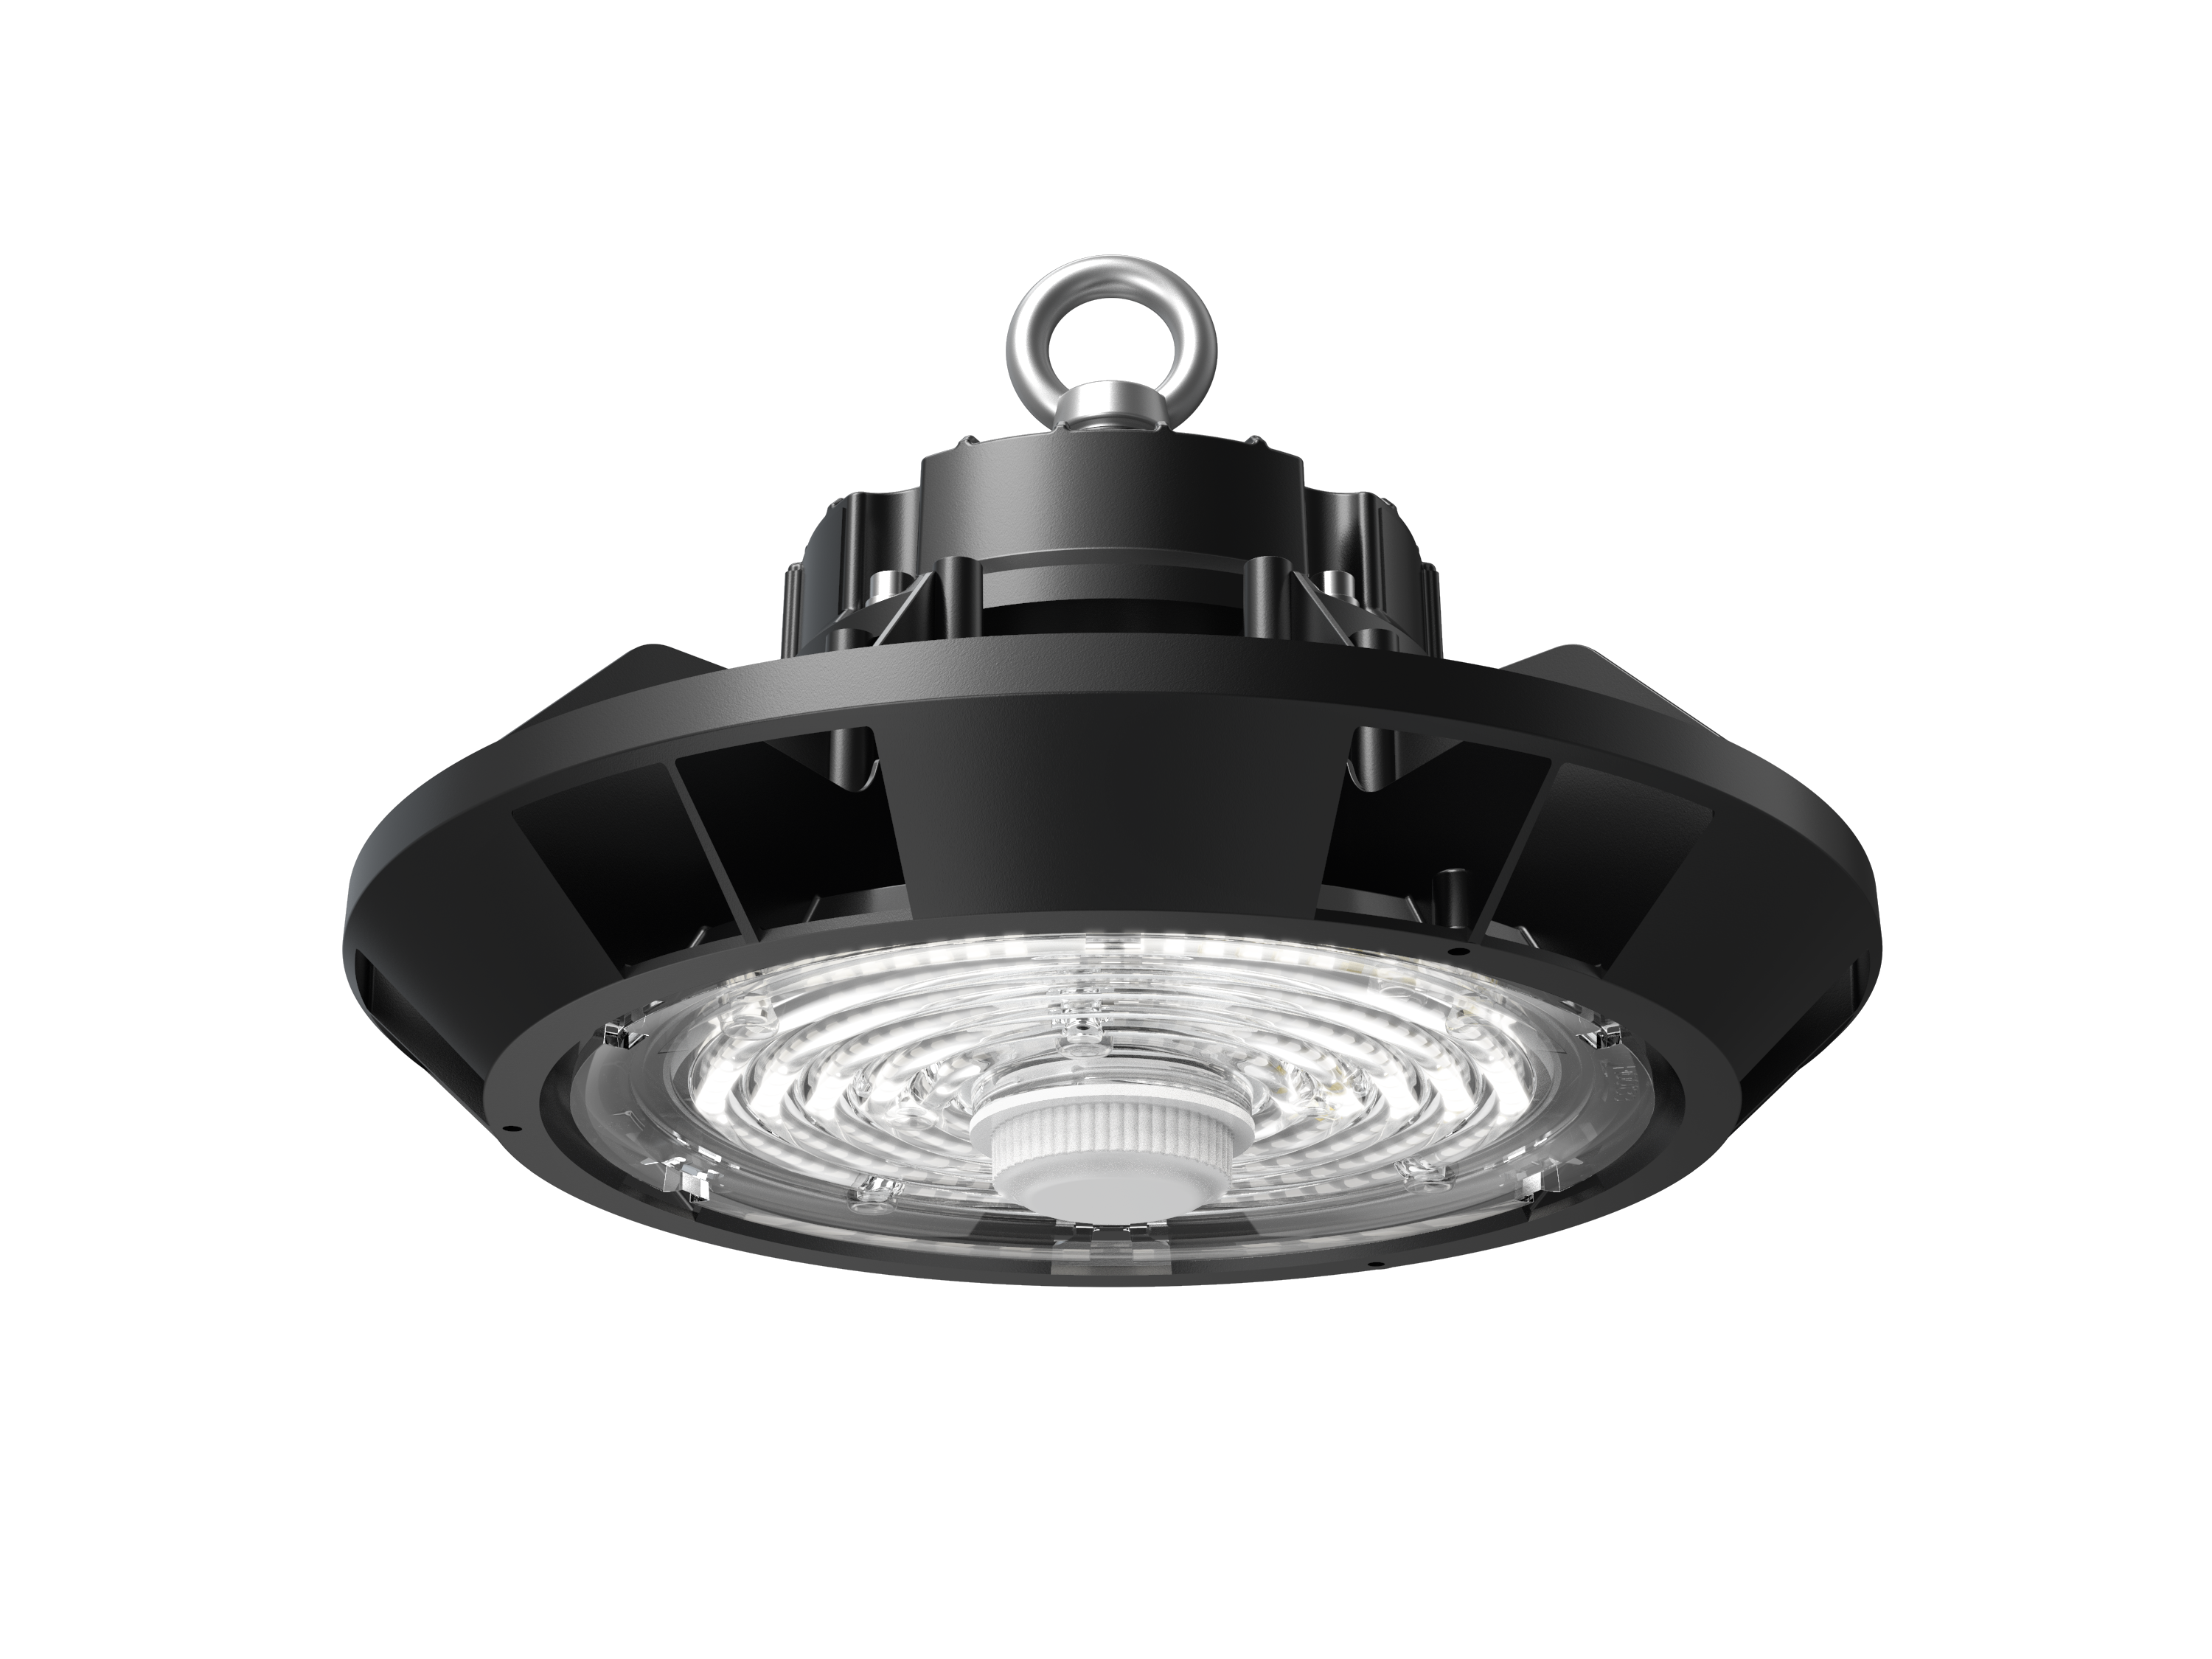 LFHB10 commercial light